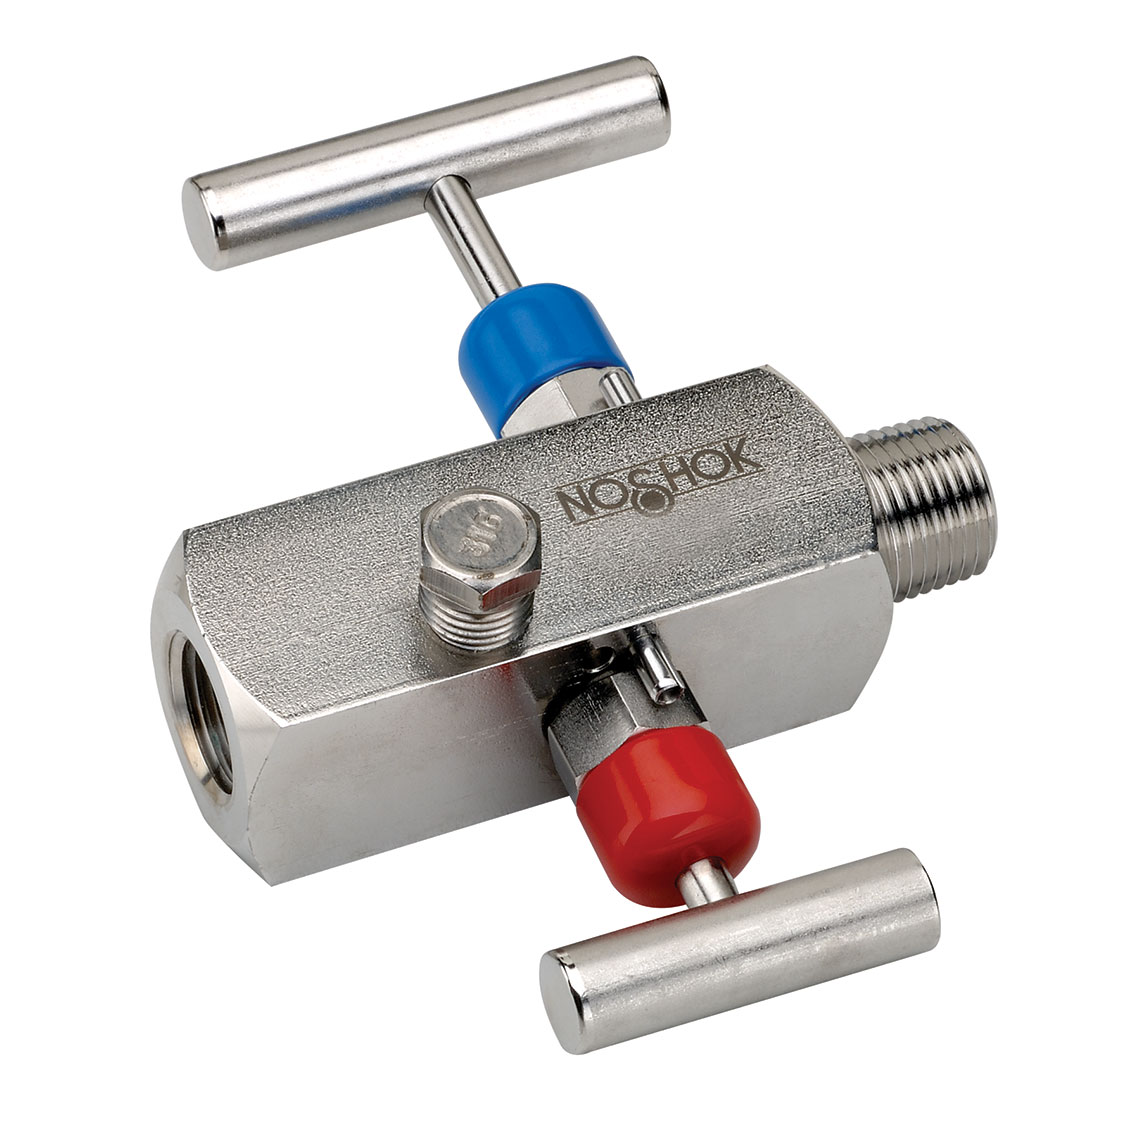 Part Number 2170-MMS, 12 National Pipe Thread (NPT), Male x Male,  Stainless Steel, Soft SeatTip, 0.187 Orifice Block and Bleed 2-Valve On  NOSHOK, Inc.